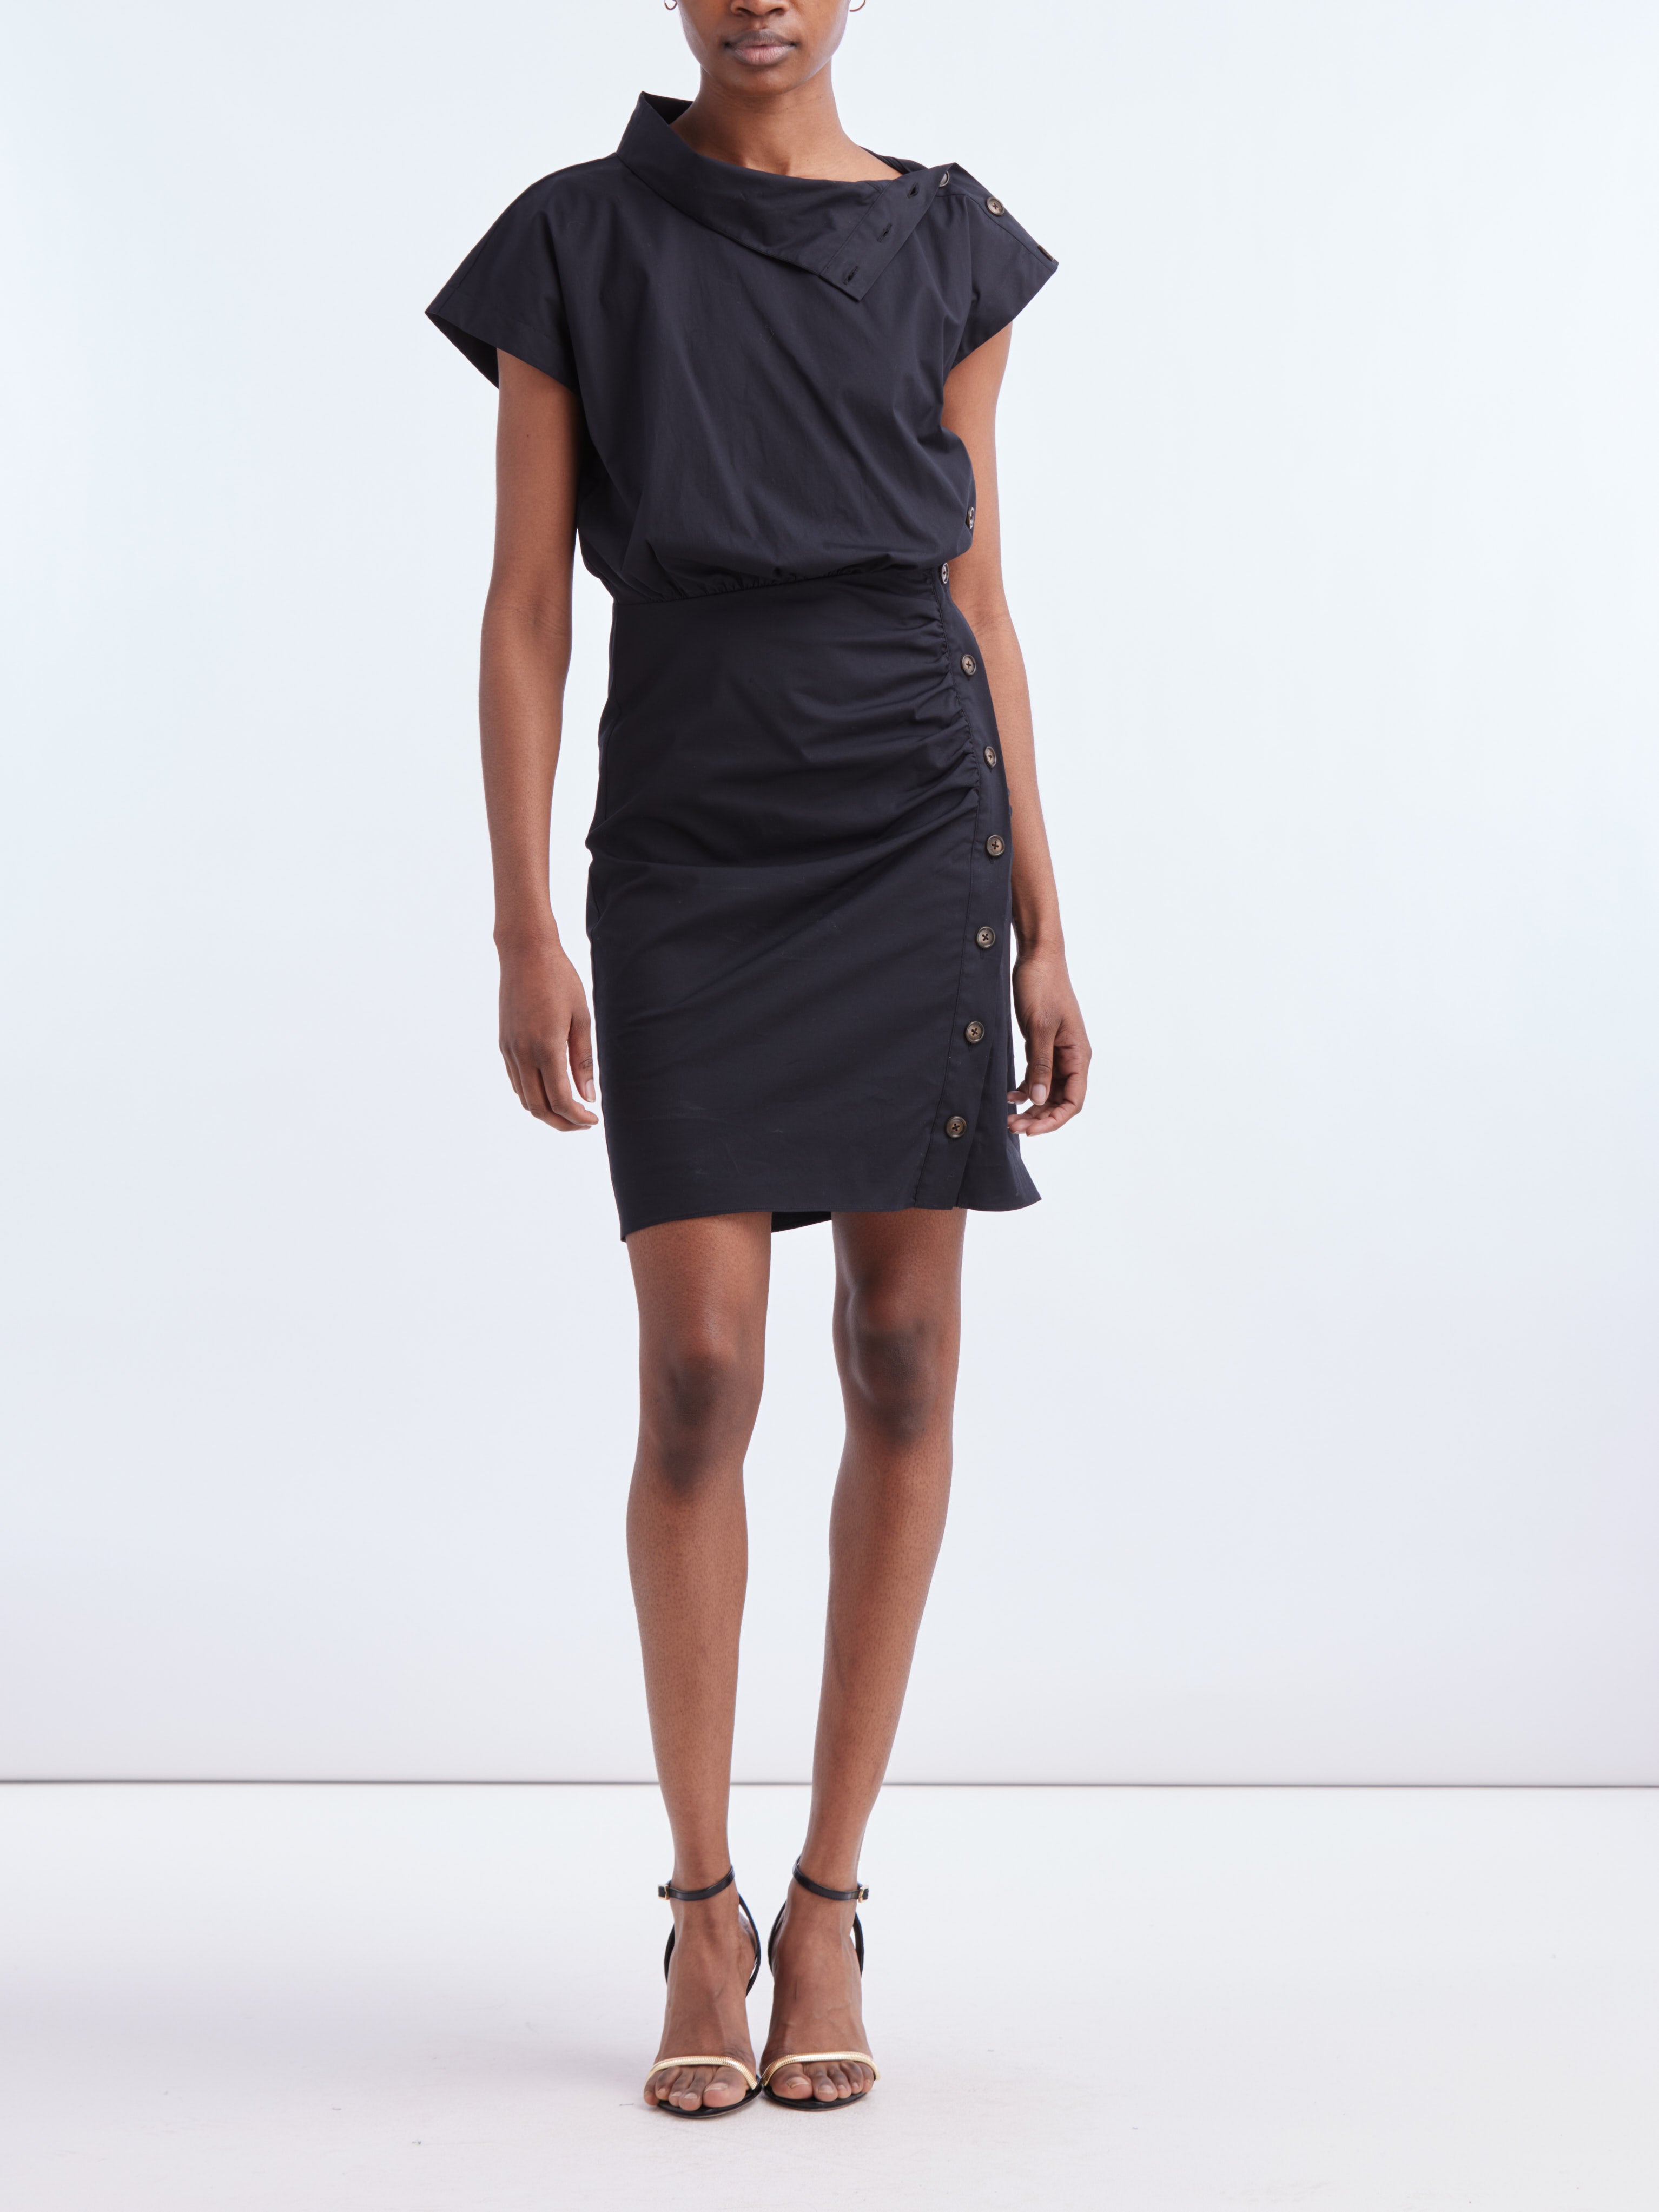 A feminine reimagination of the classic shirtdress. With its asymmetrical collar and cap sleeves, this crisp poplin style is completed with tortoise buttons along the shoulder and down the side. Our signature ruching is beautifully at play here, creating a figure-flattering silhouette that makes it an easy go-to for everyday wear. Dress it up with boots for nights out.